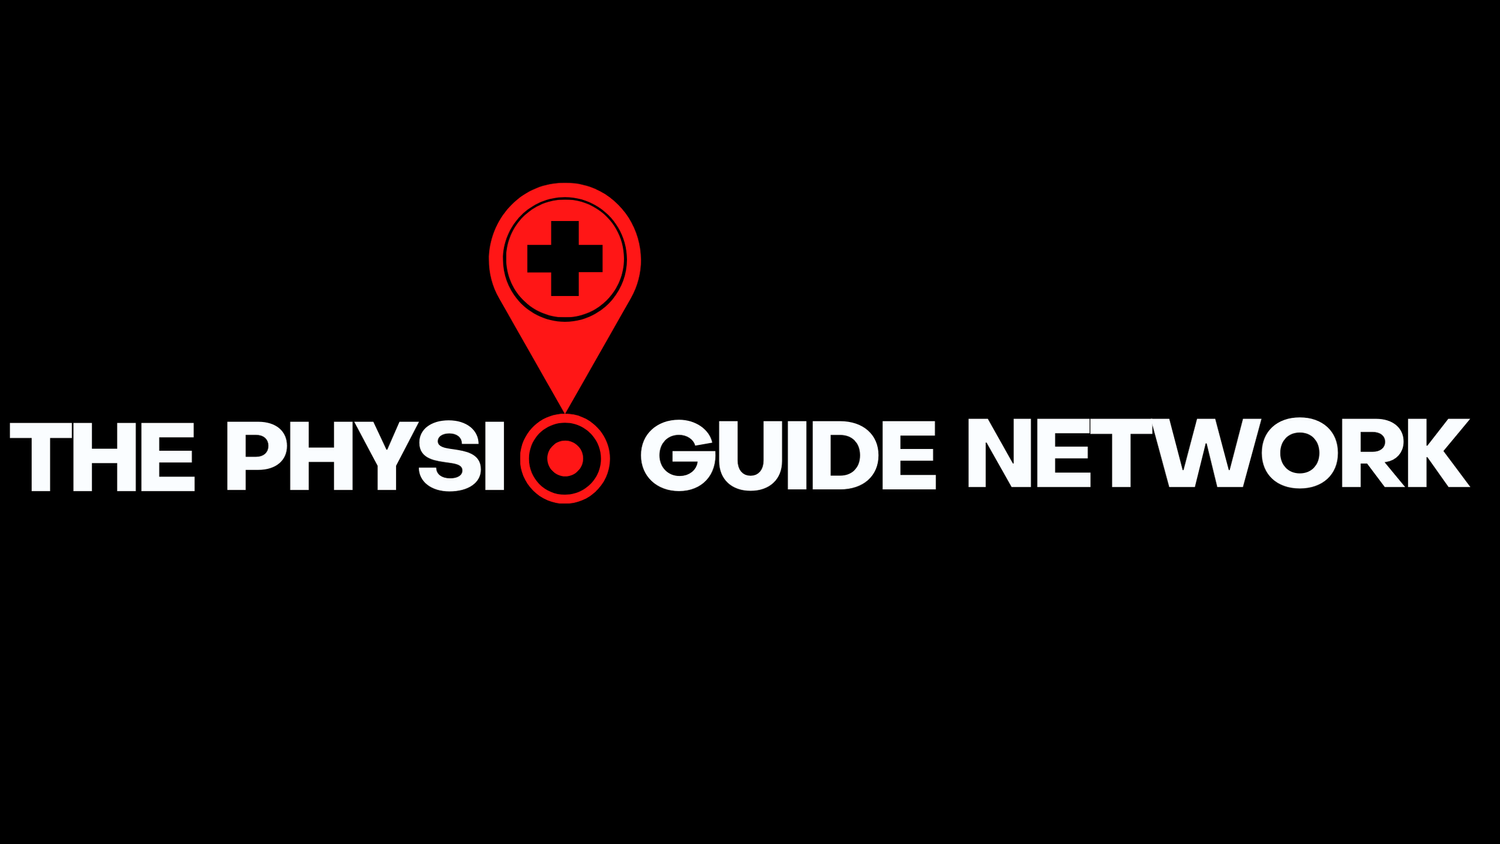 The Physio Guide Network